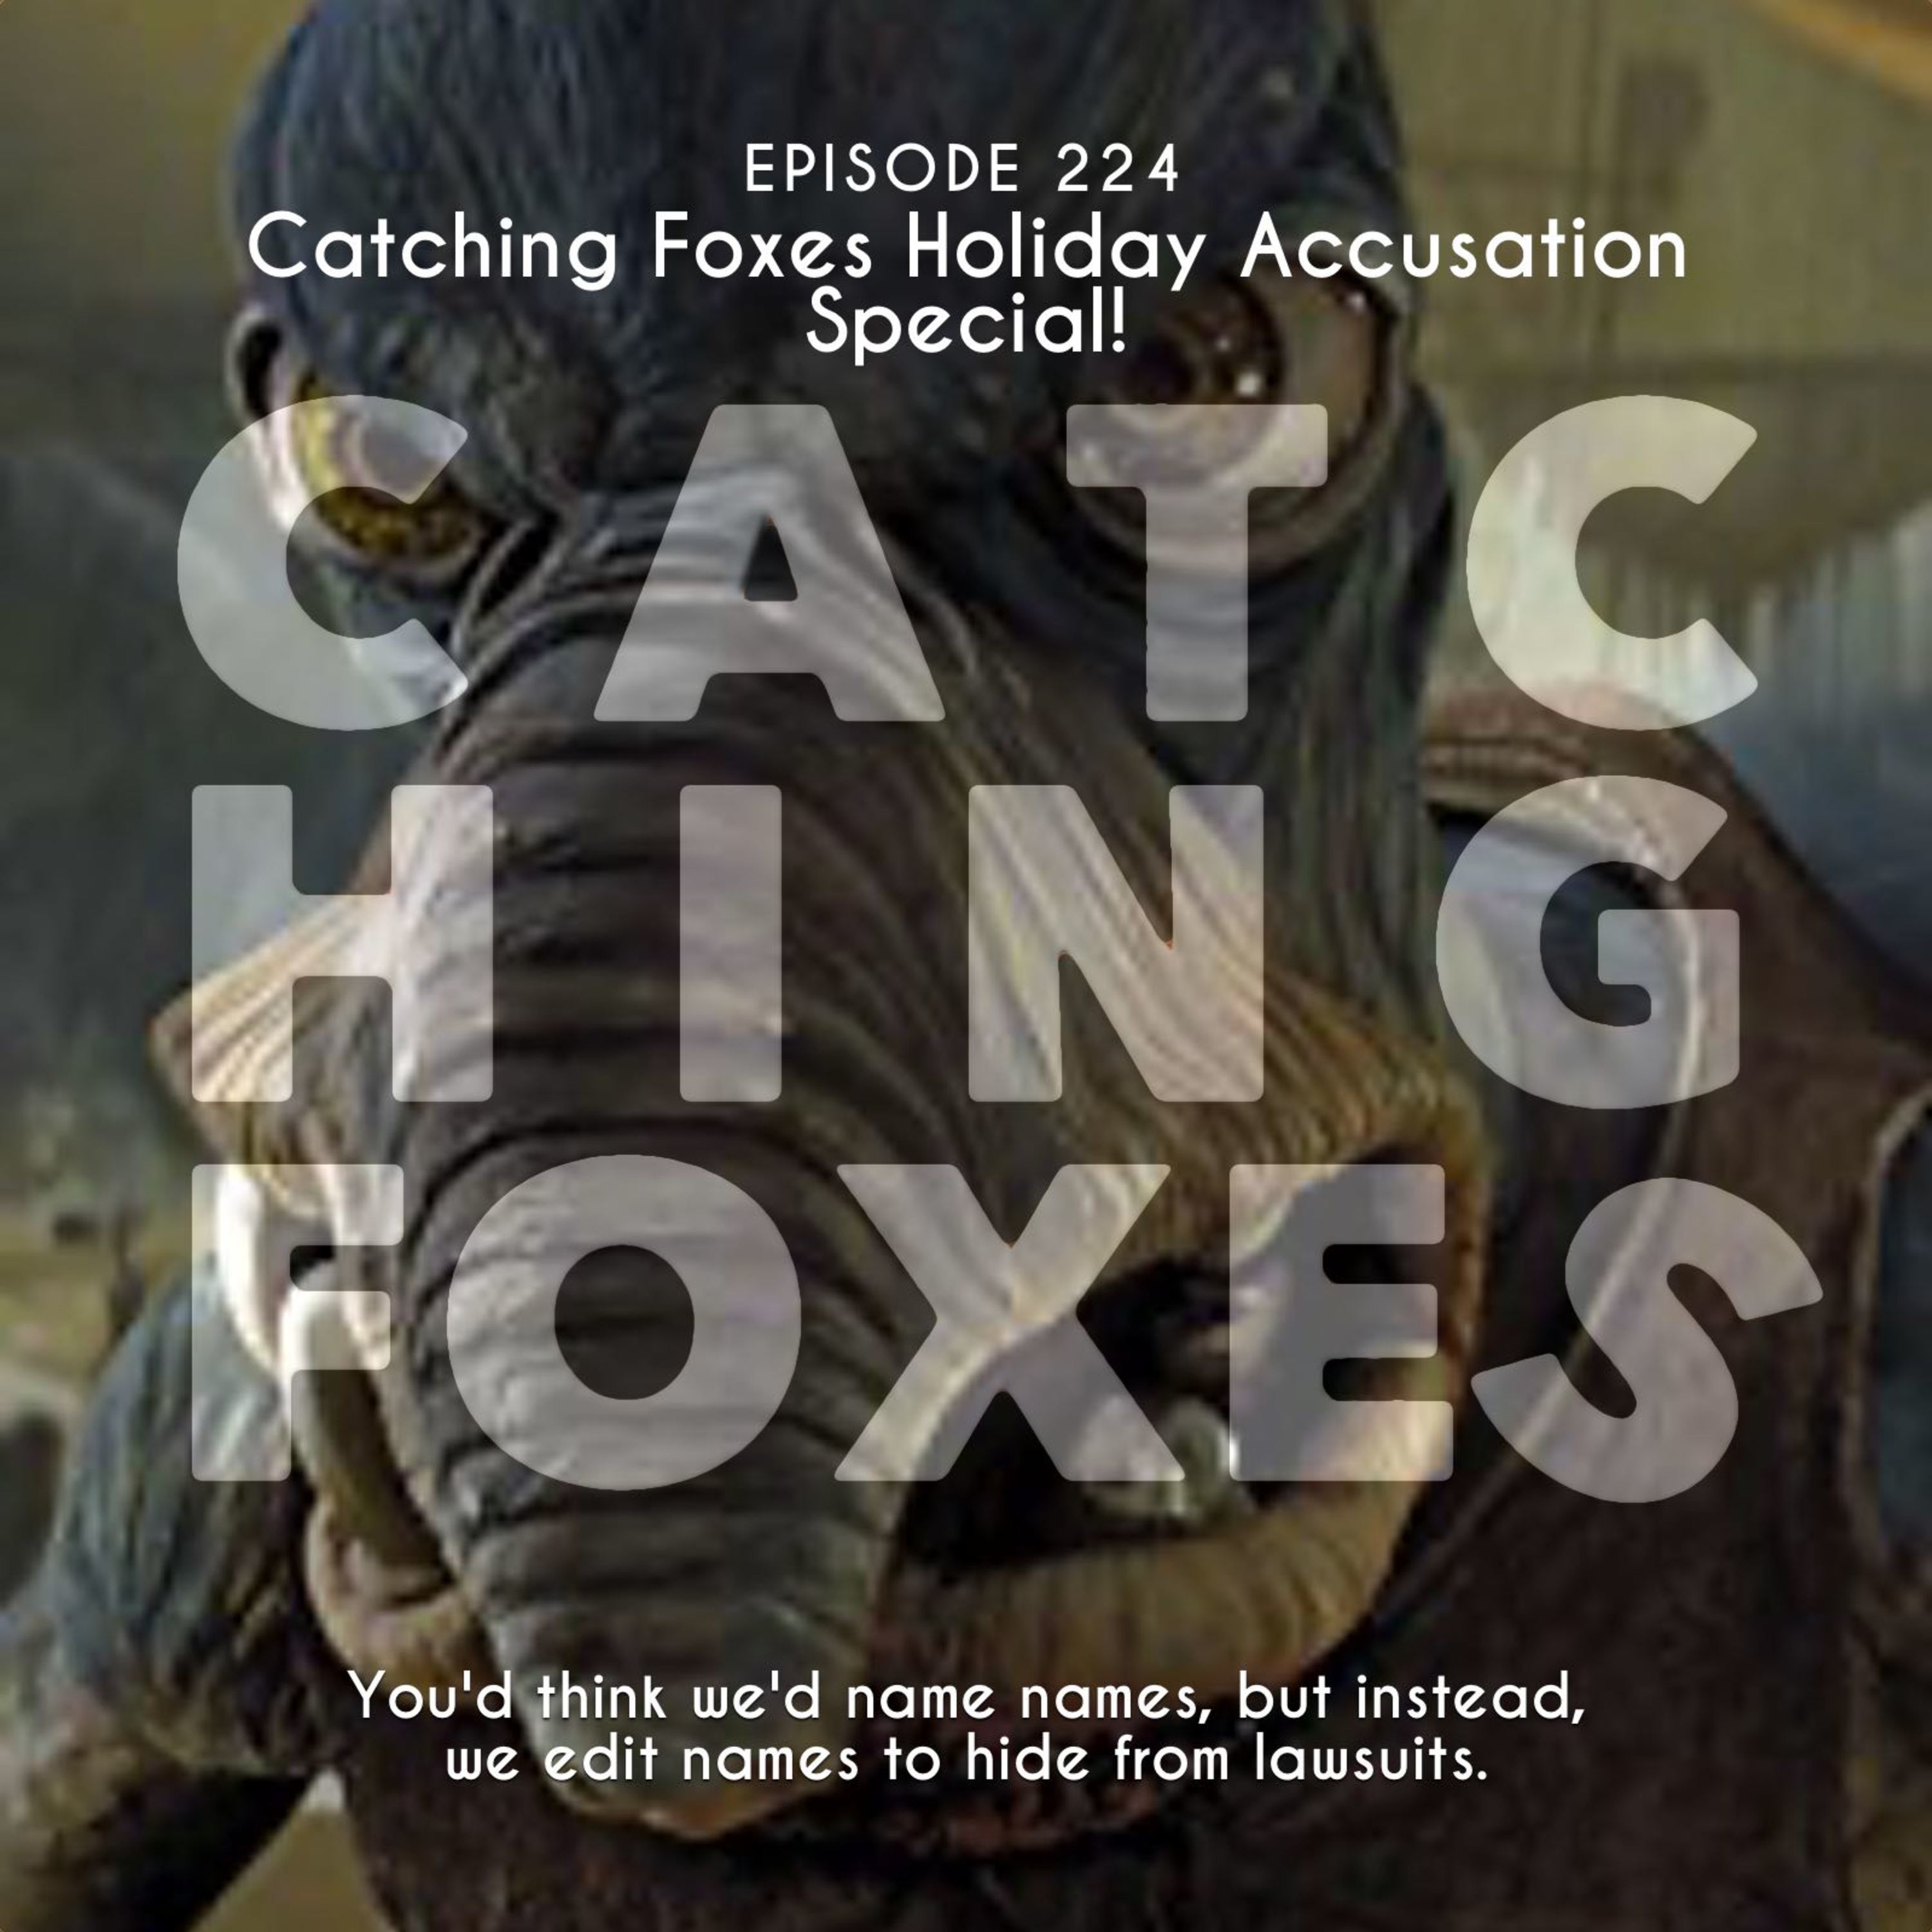 Catching Foxes Holiday Accusation Special!